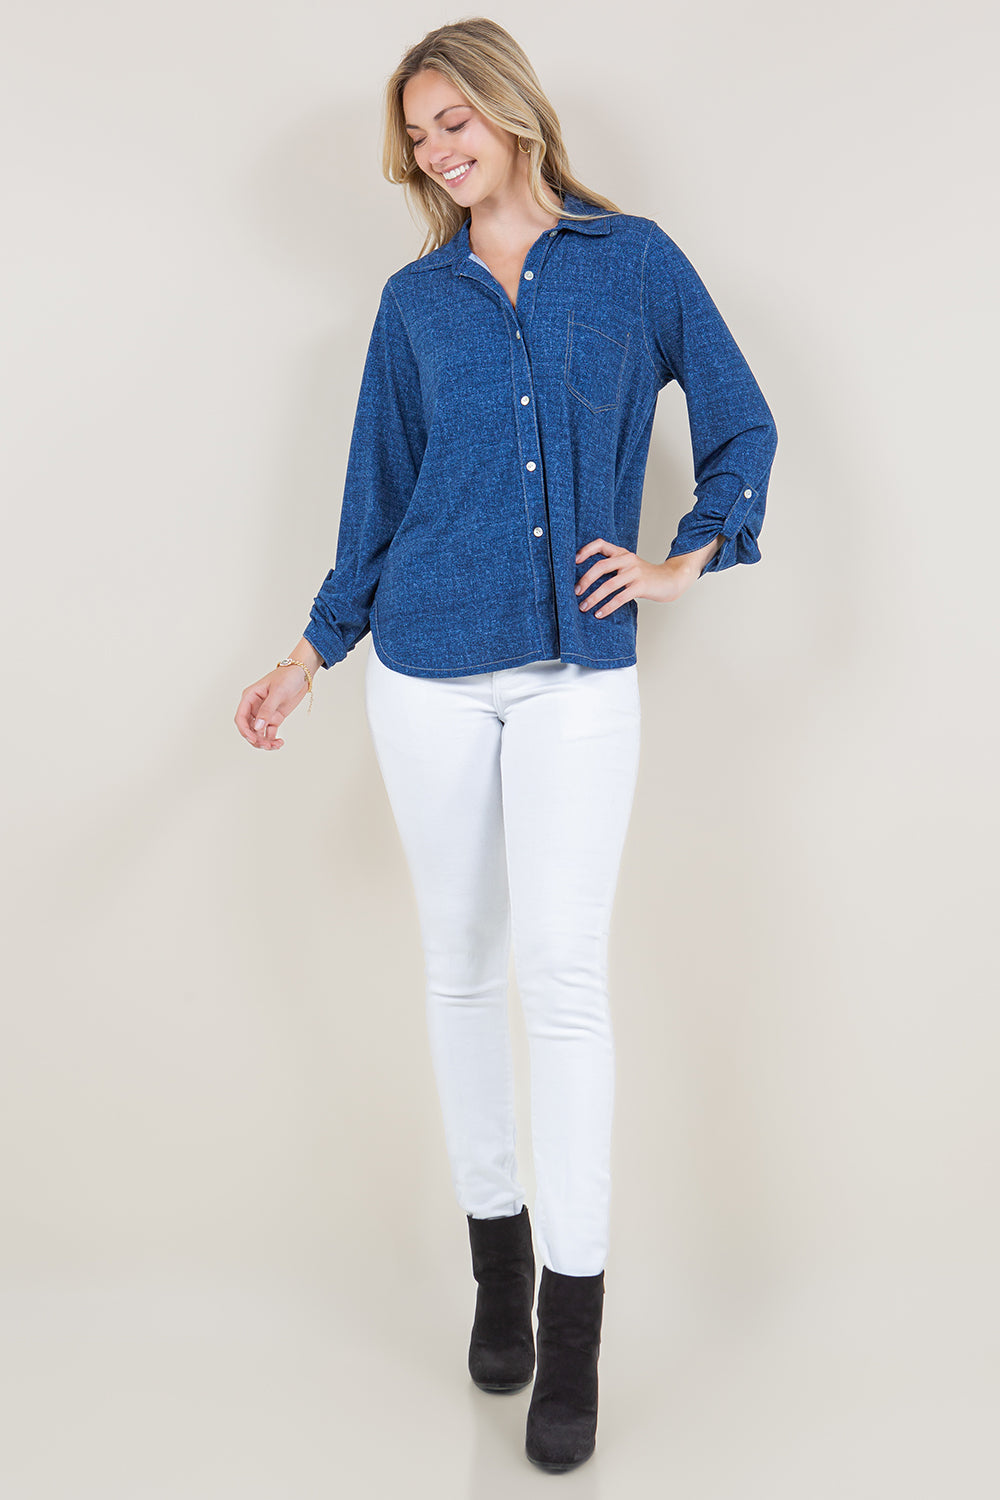 LS ROLLED UP BUTTON DOWN SHIRT TOP - T11679-92795